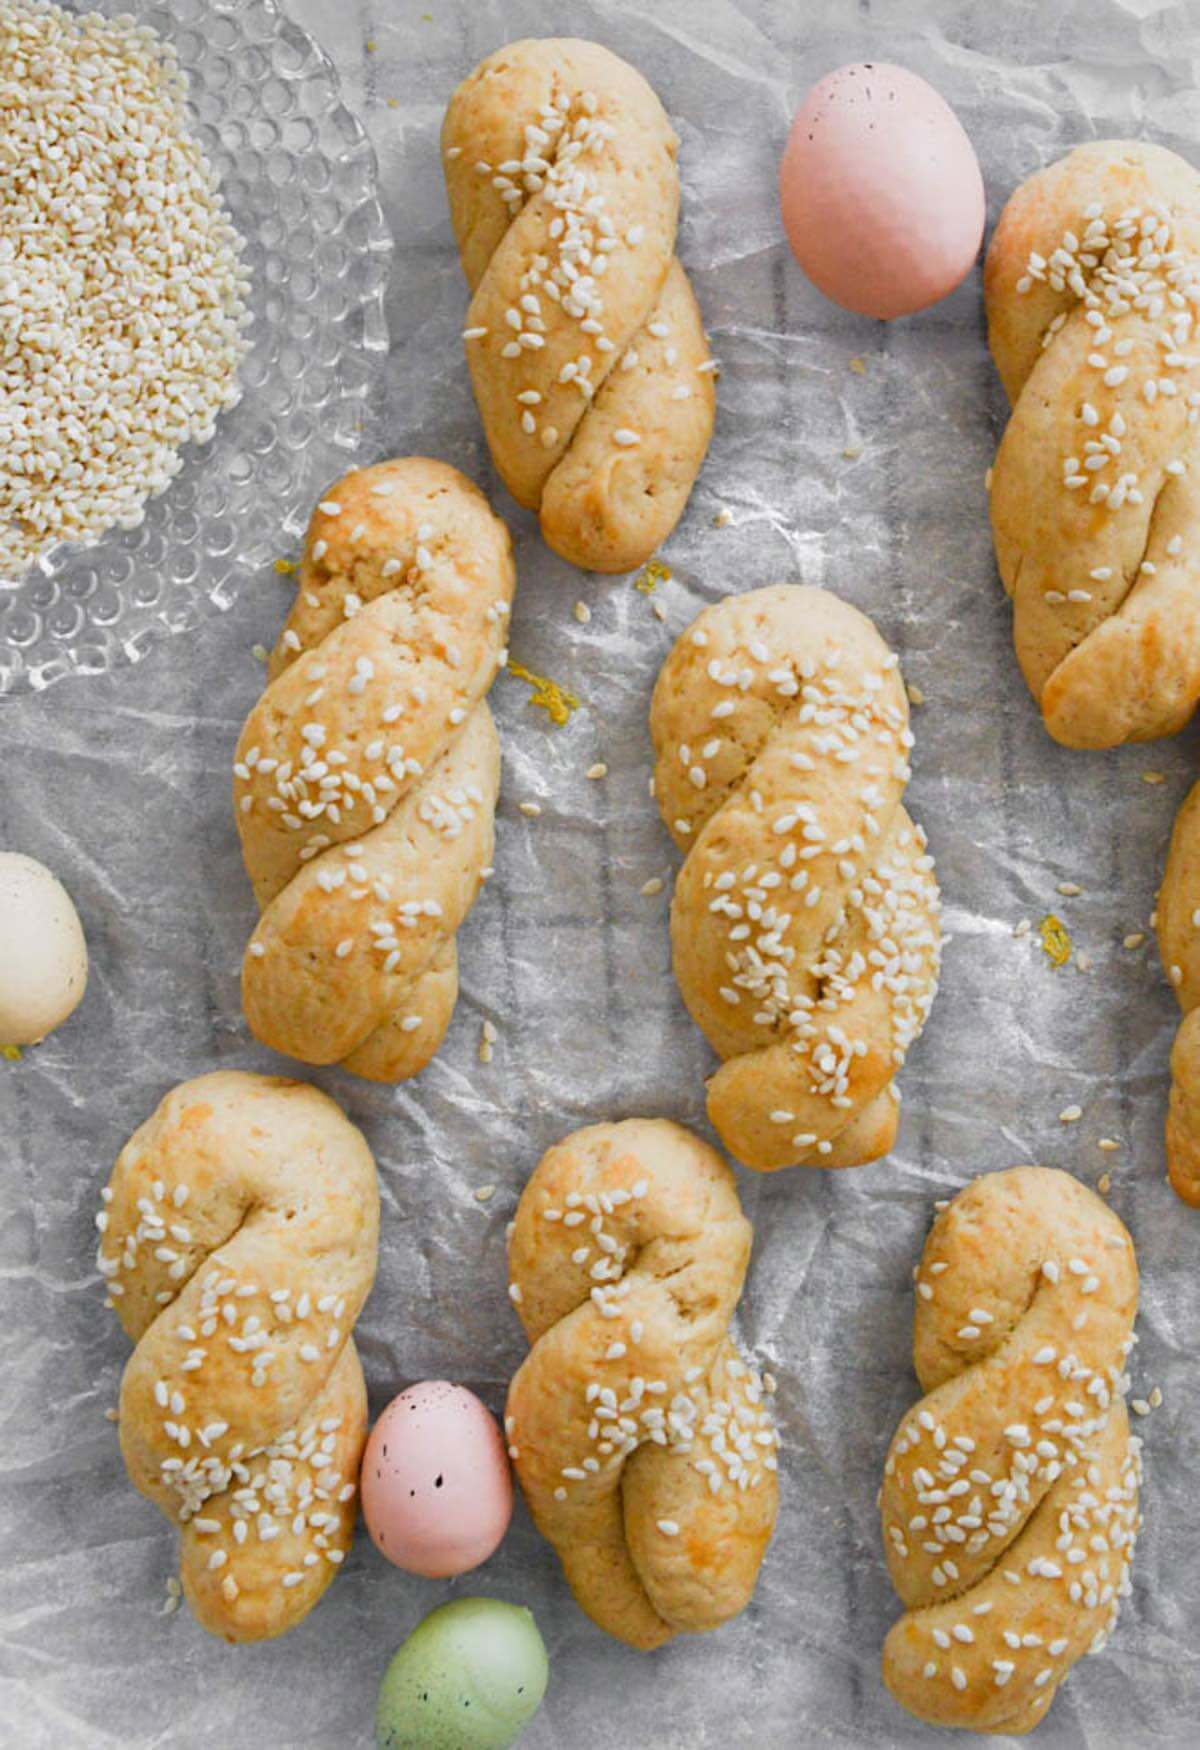 Greek easter cookies (koulourakia) with sesame seeds on white parchment paper.